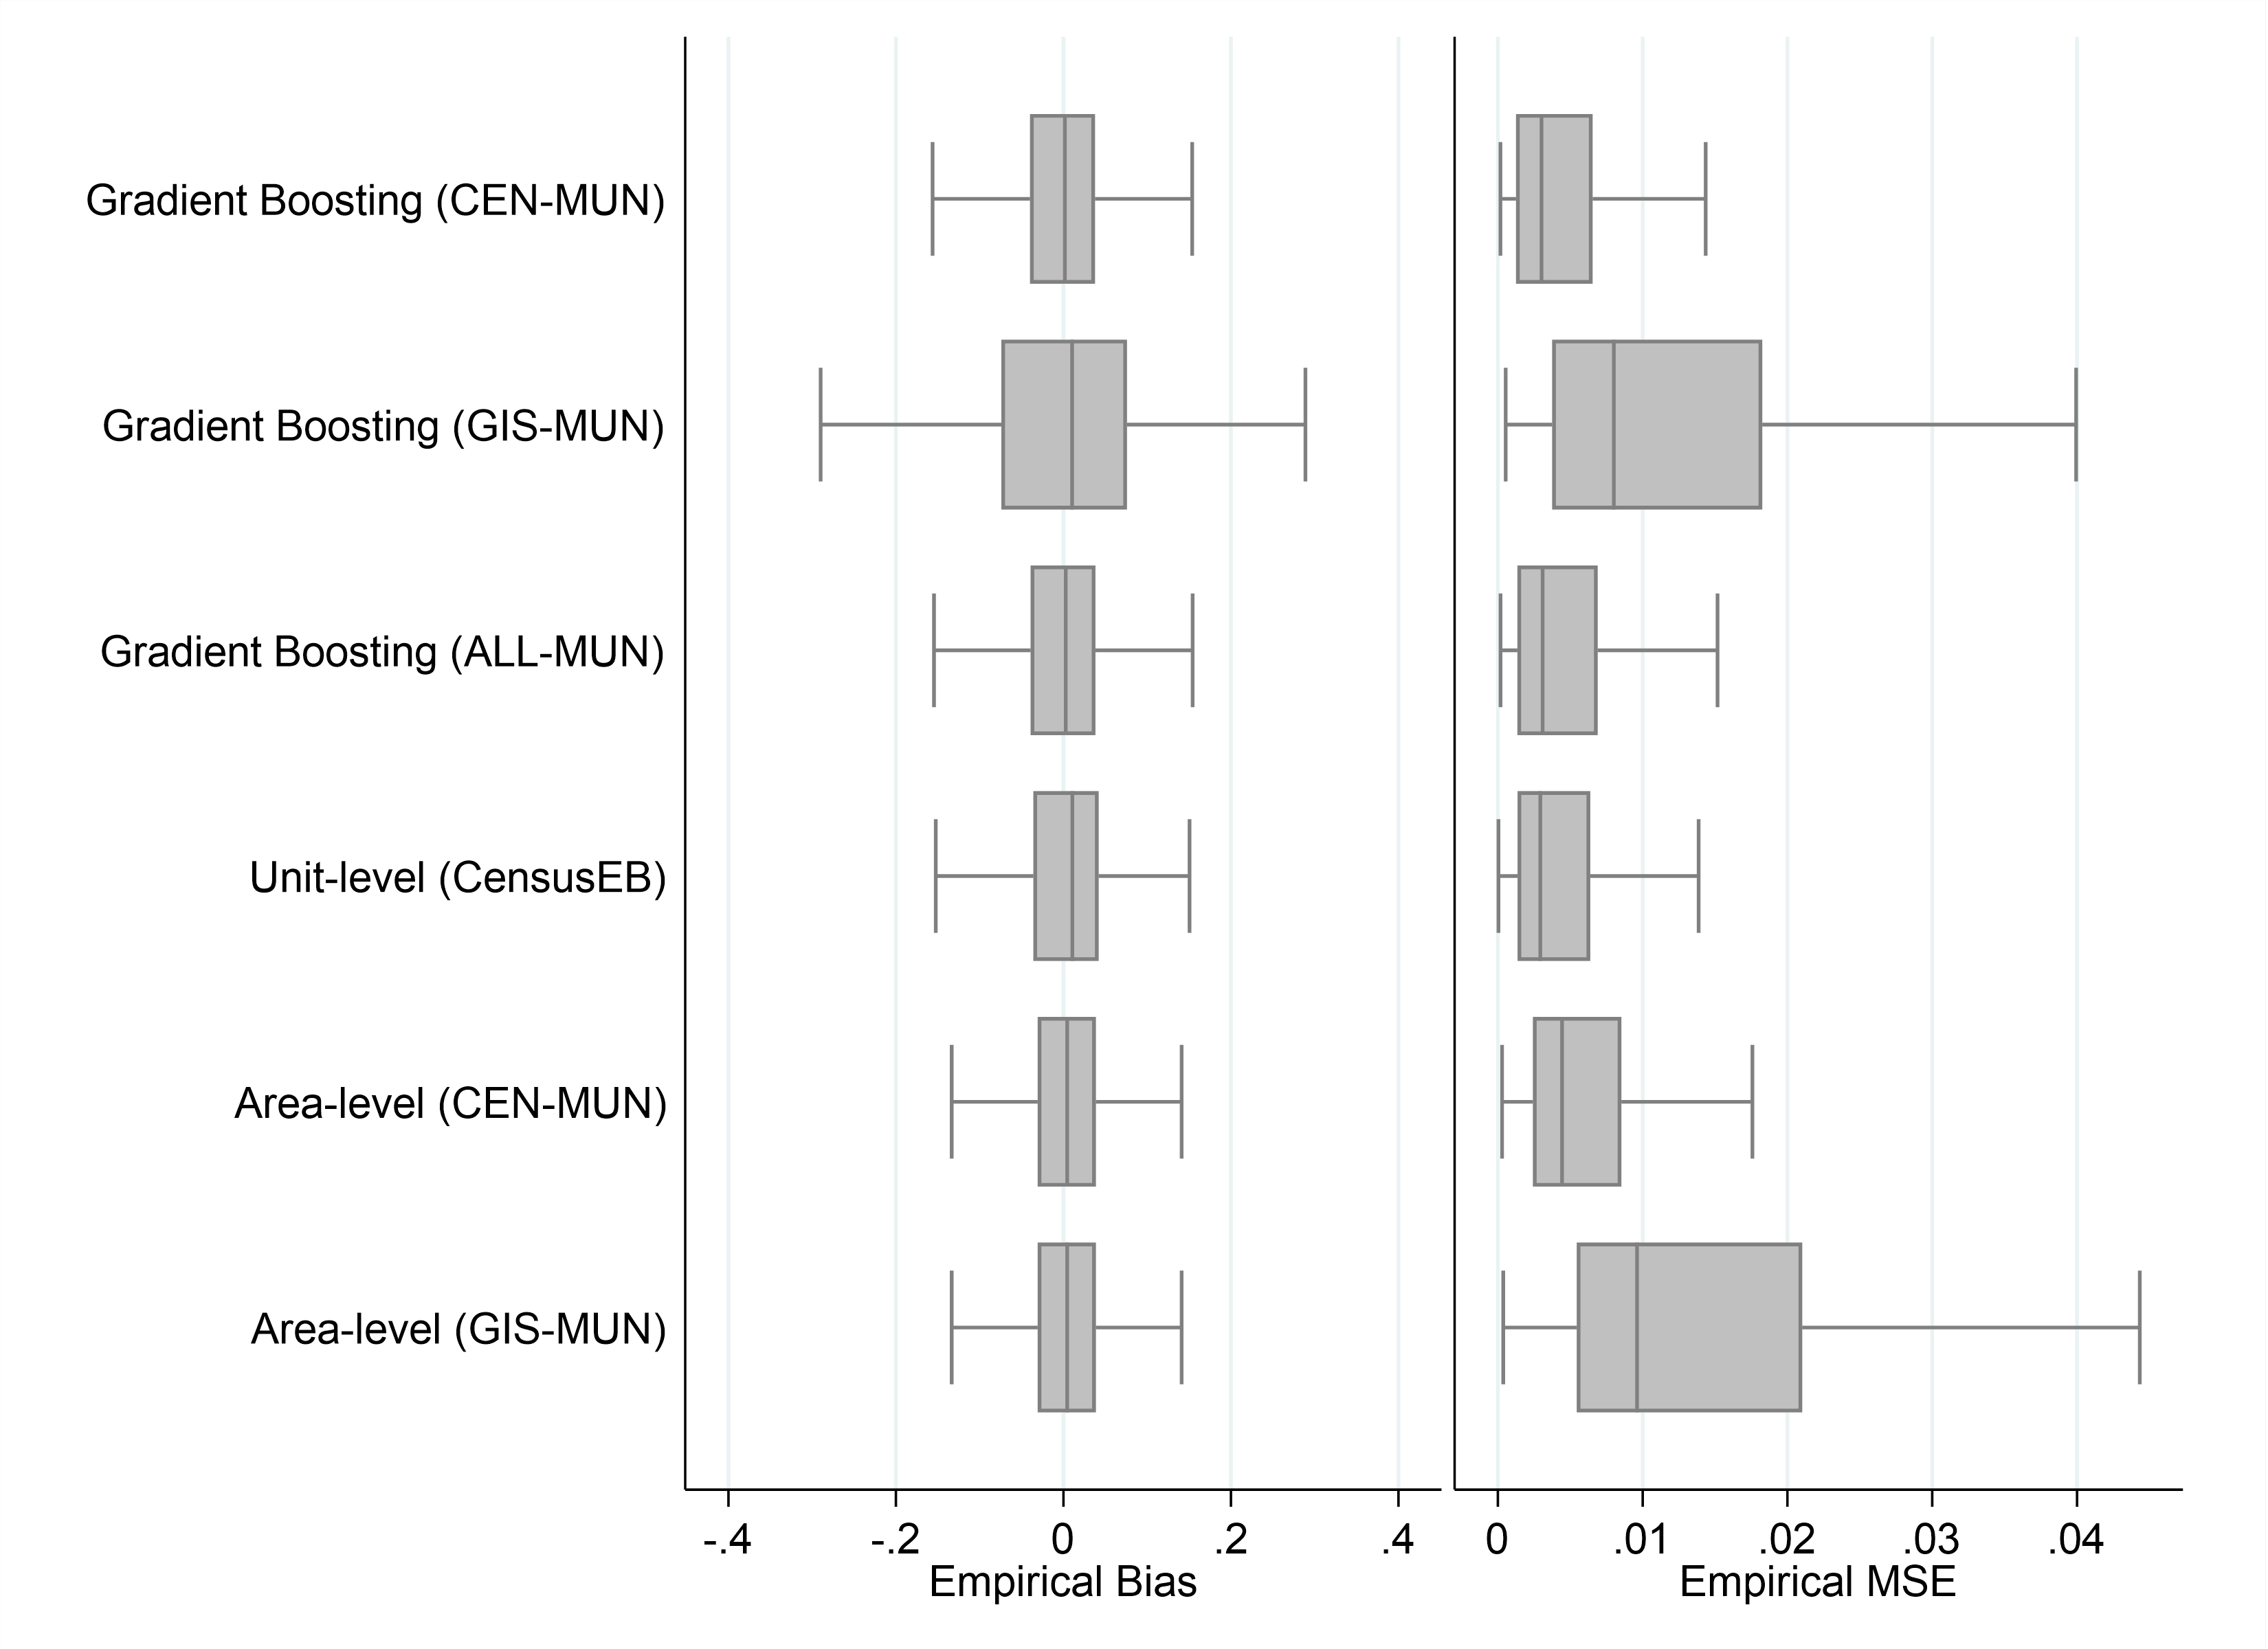 A chart showing Figure 1. Empirical Bias and MSE of different methods